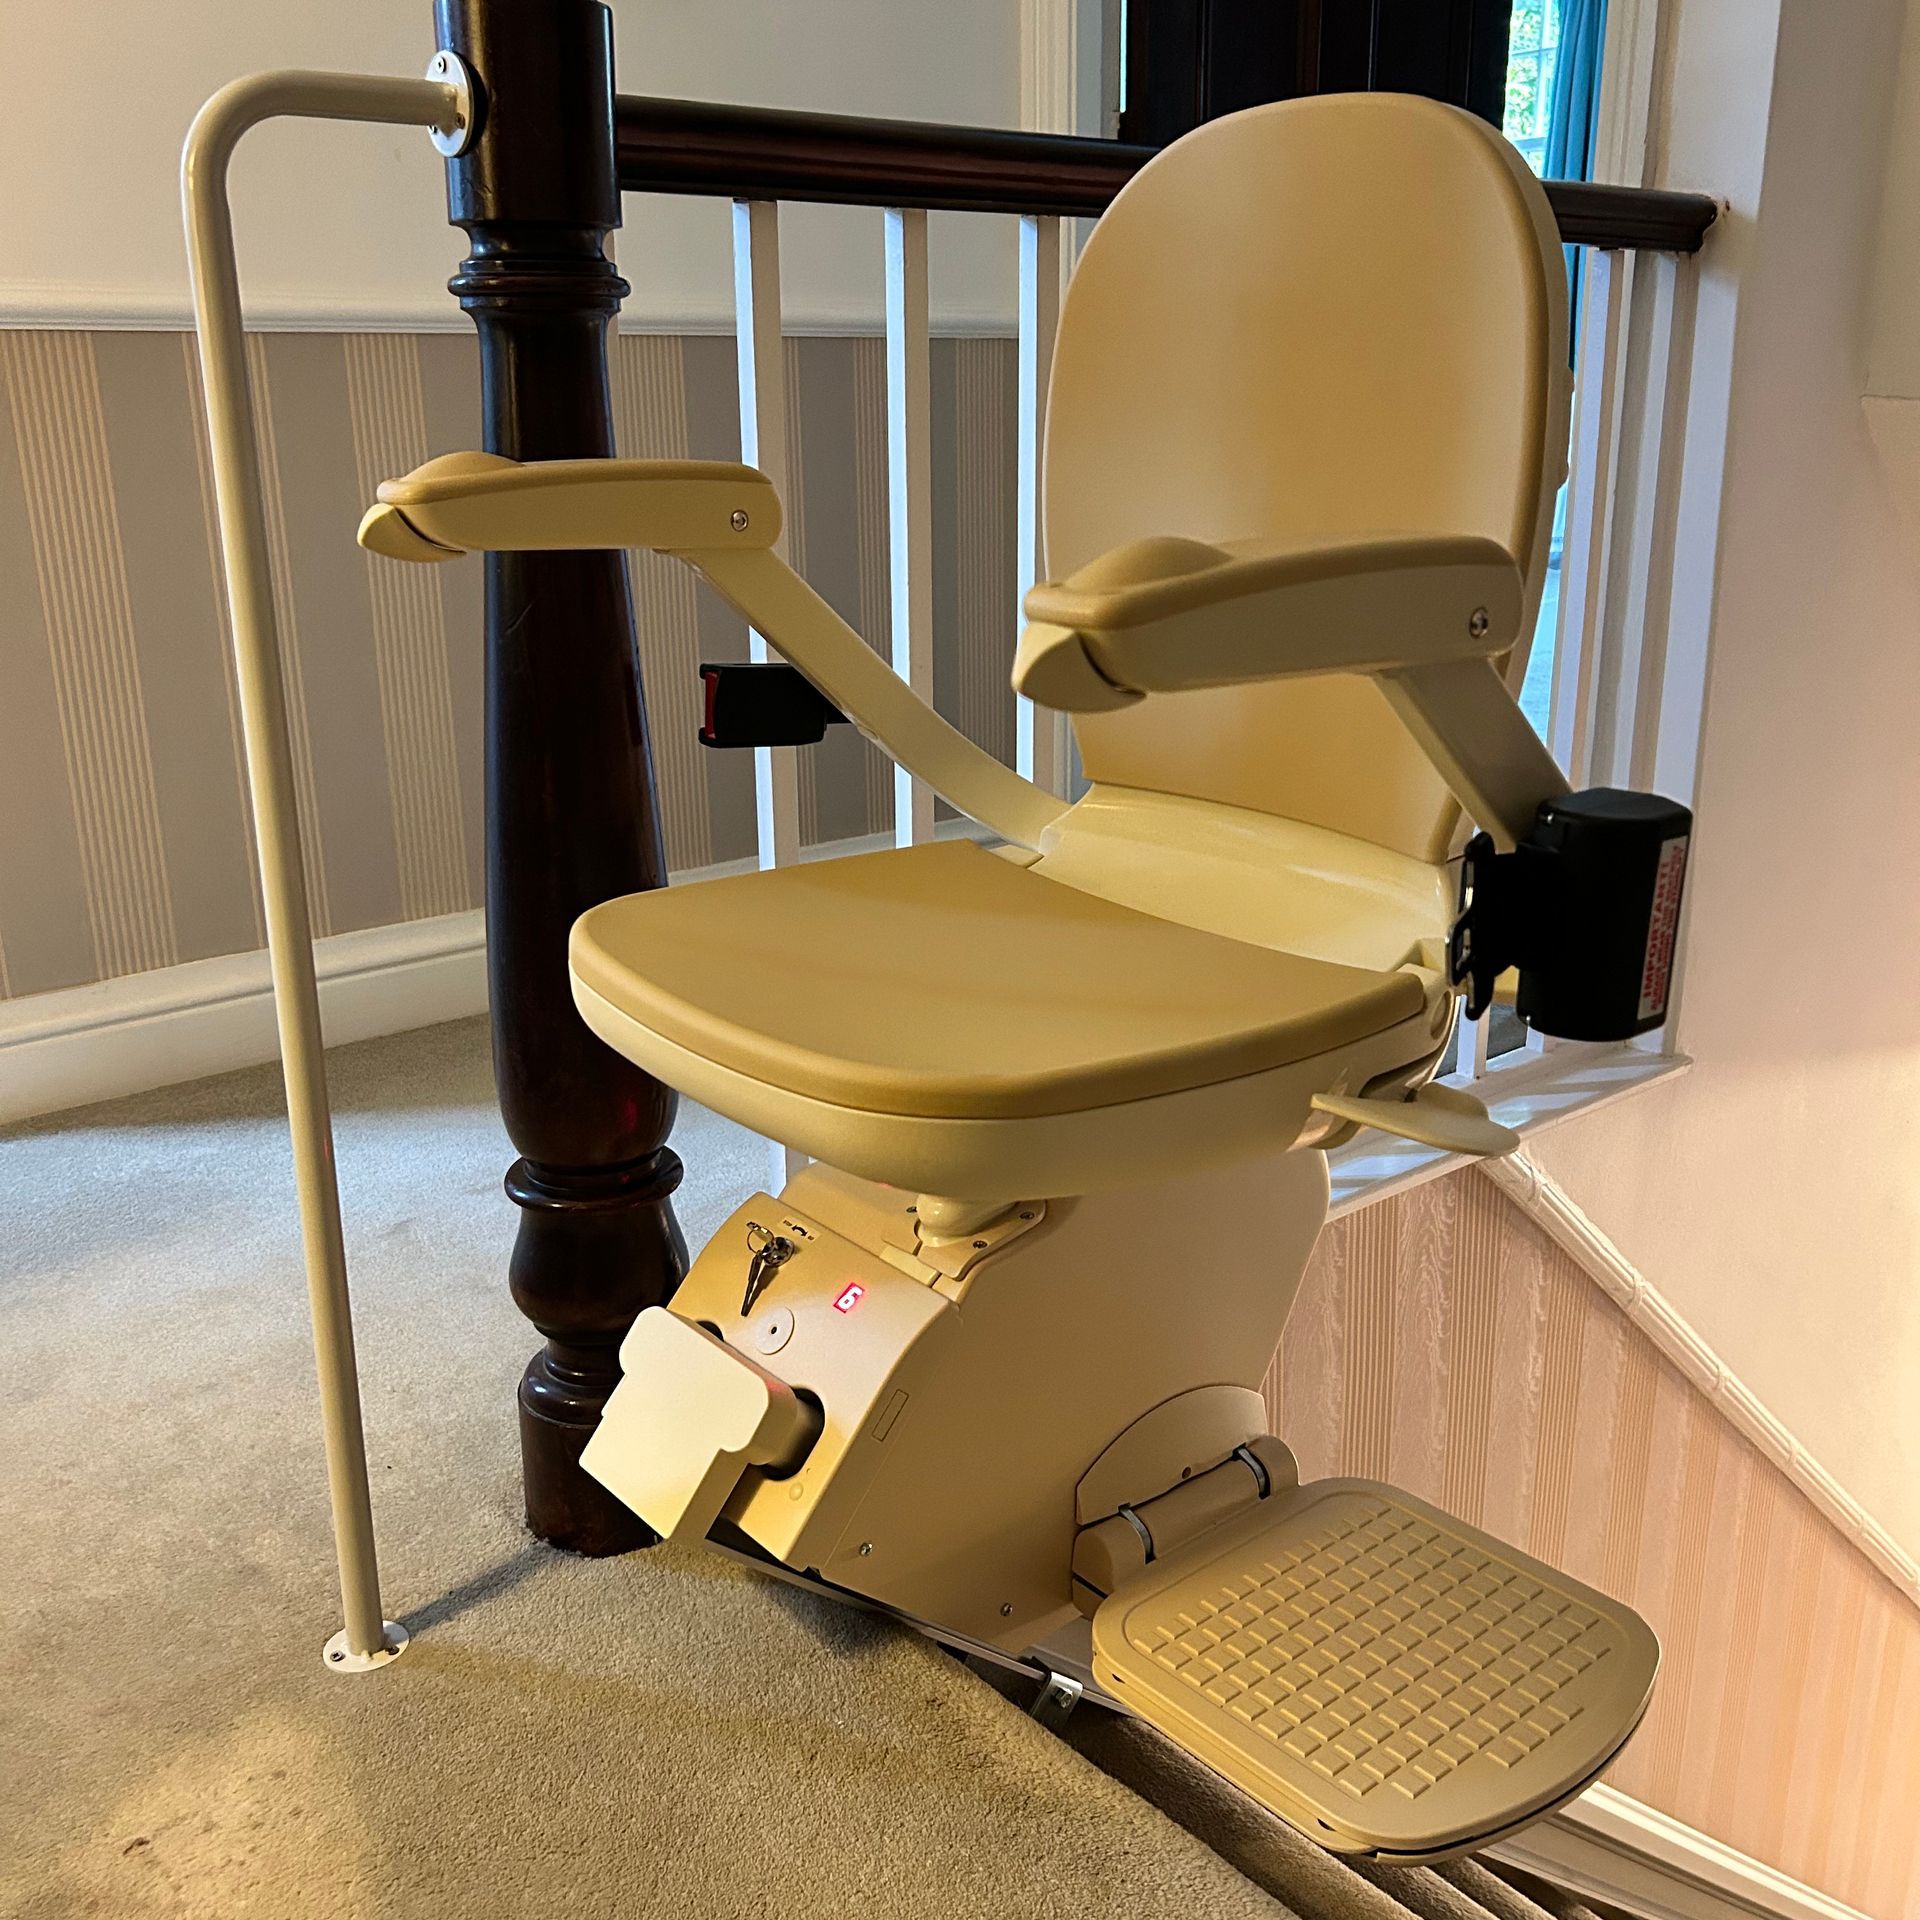 We pay cash for your unwanted stairlift. Free stairlift removal. We buy Acorn and Brooks stairlift.